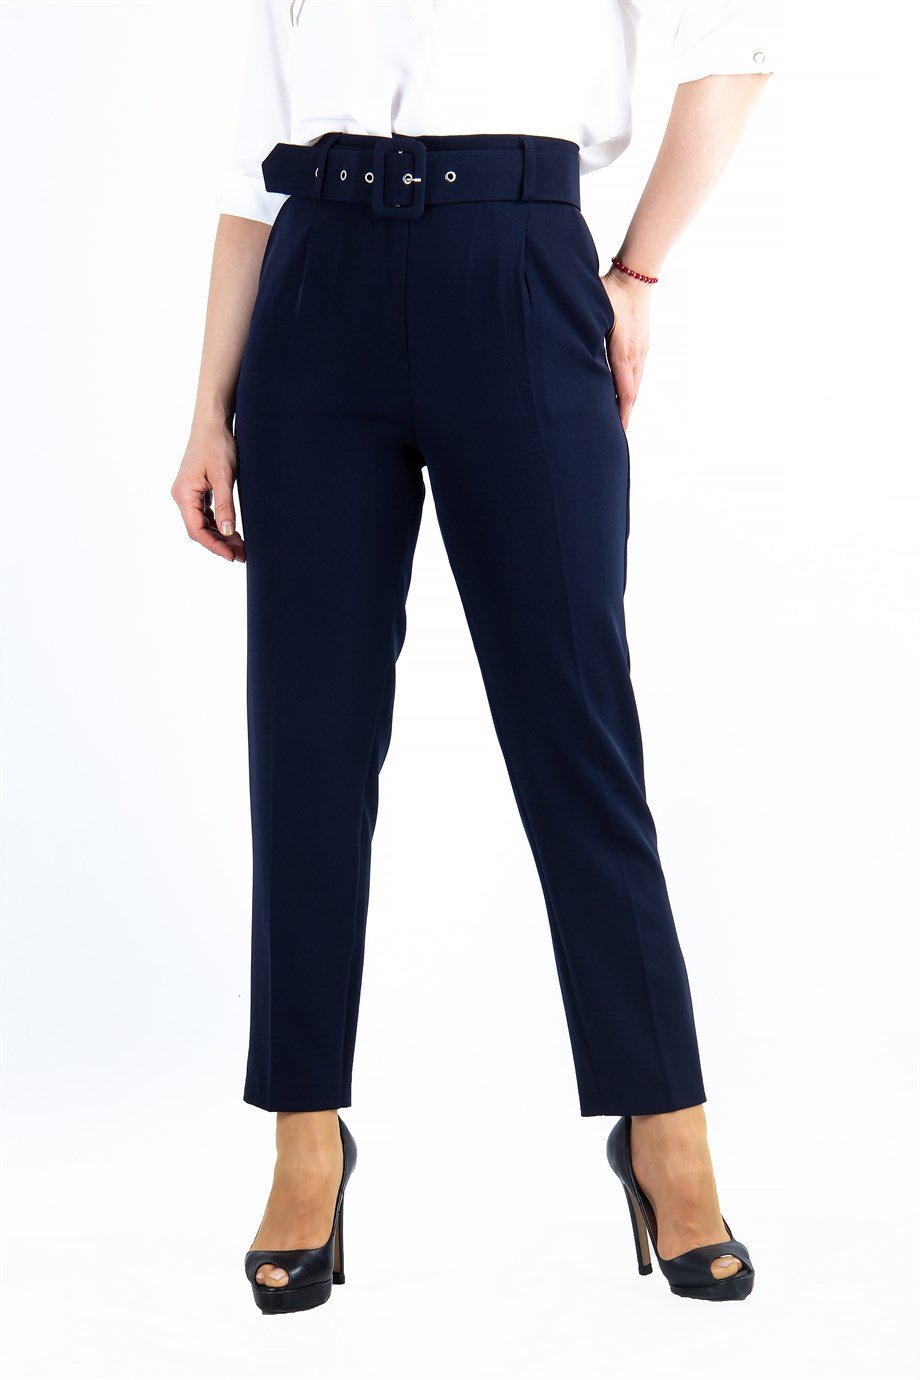 Korean Streetwear: Plus Size High Waist Straight Smart Black Trousers Womens  In Pink And Black For Women Elastic Waists And Formal Wear 201118 From  Dou04, $26.26 | DHgate.Com